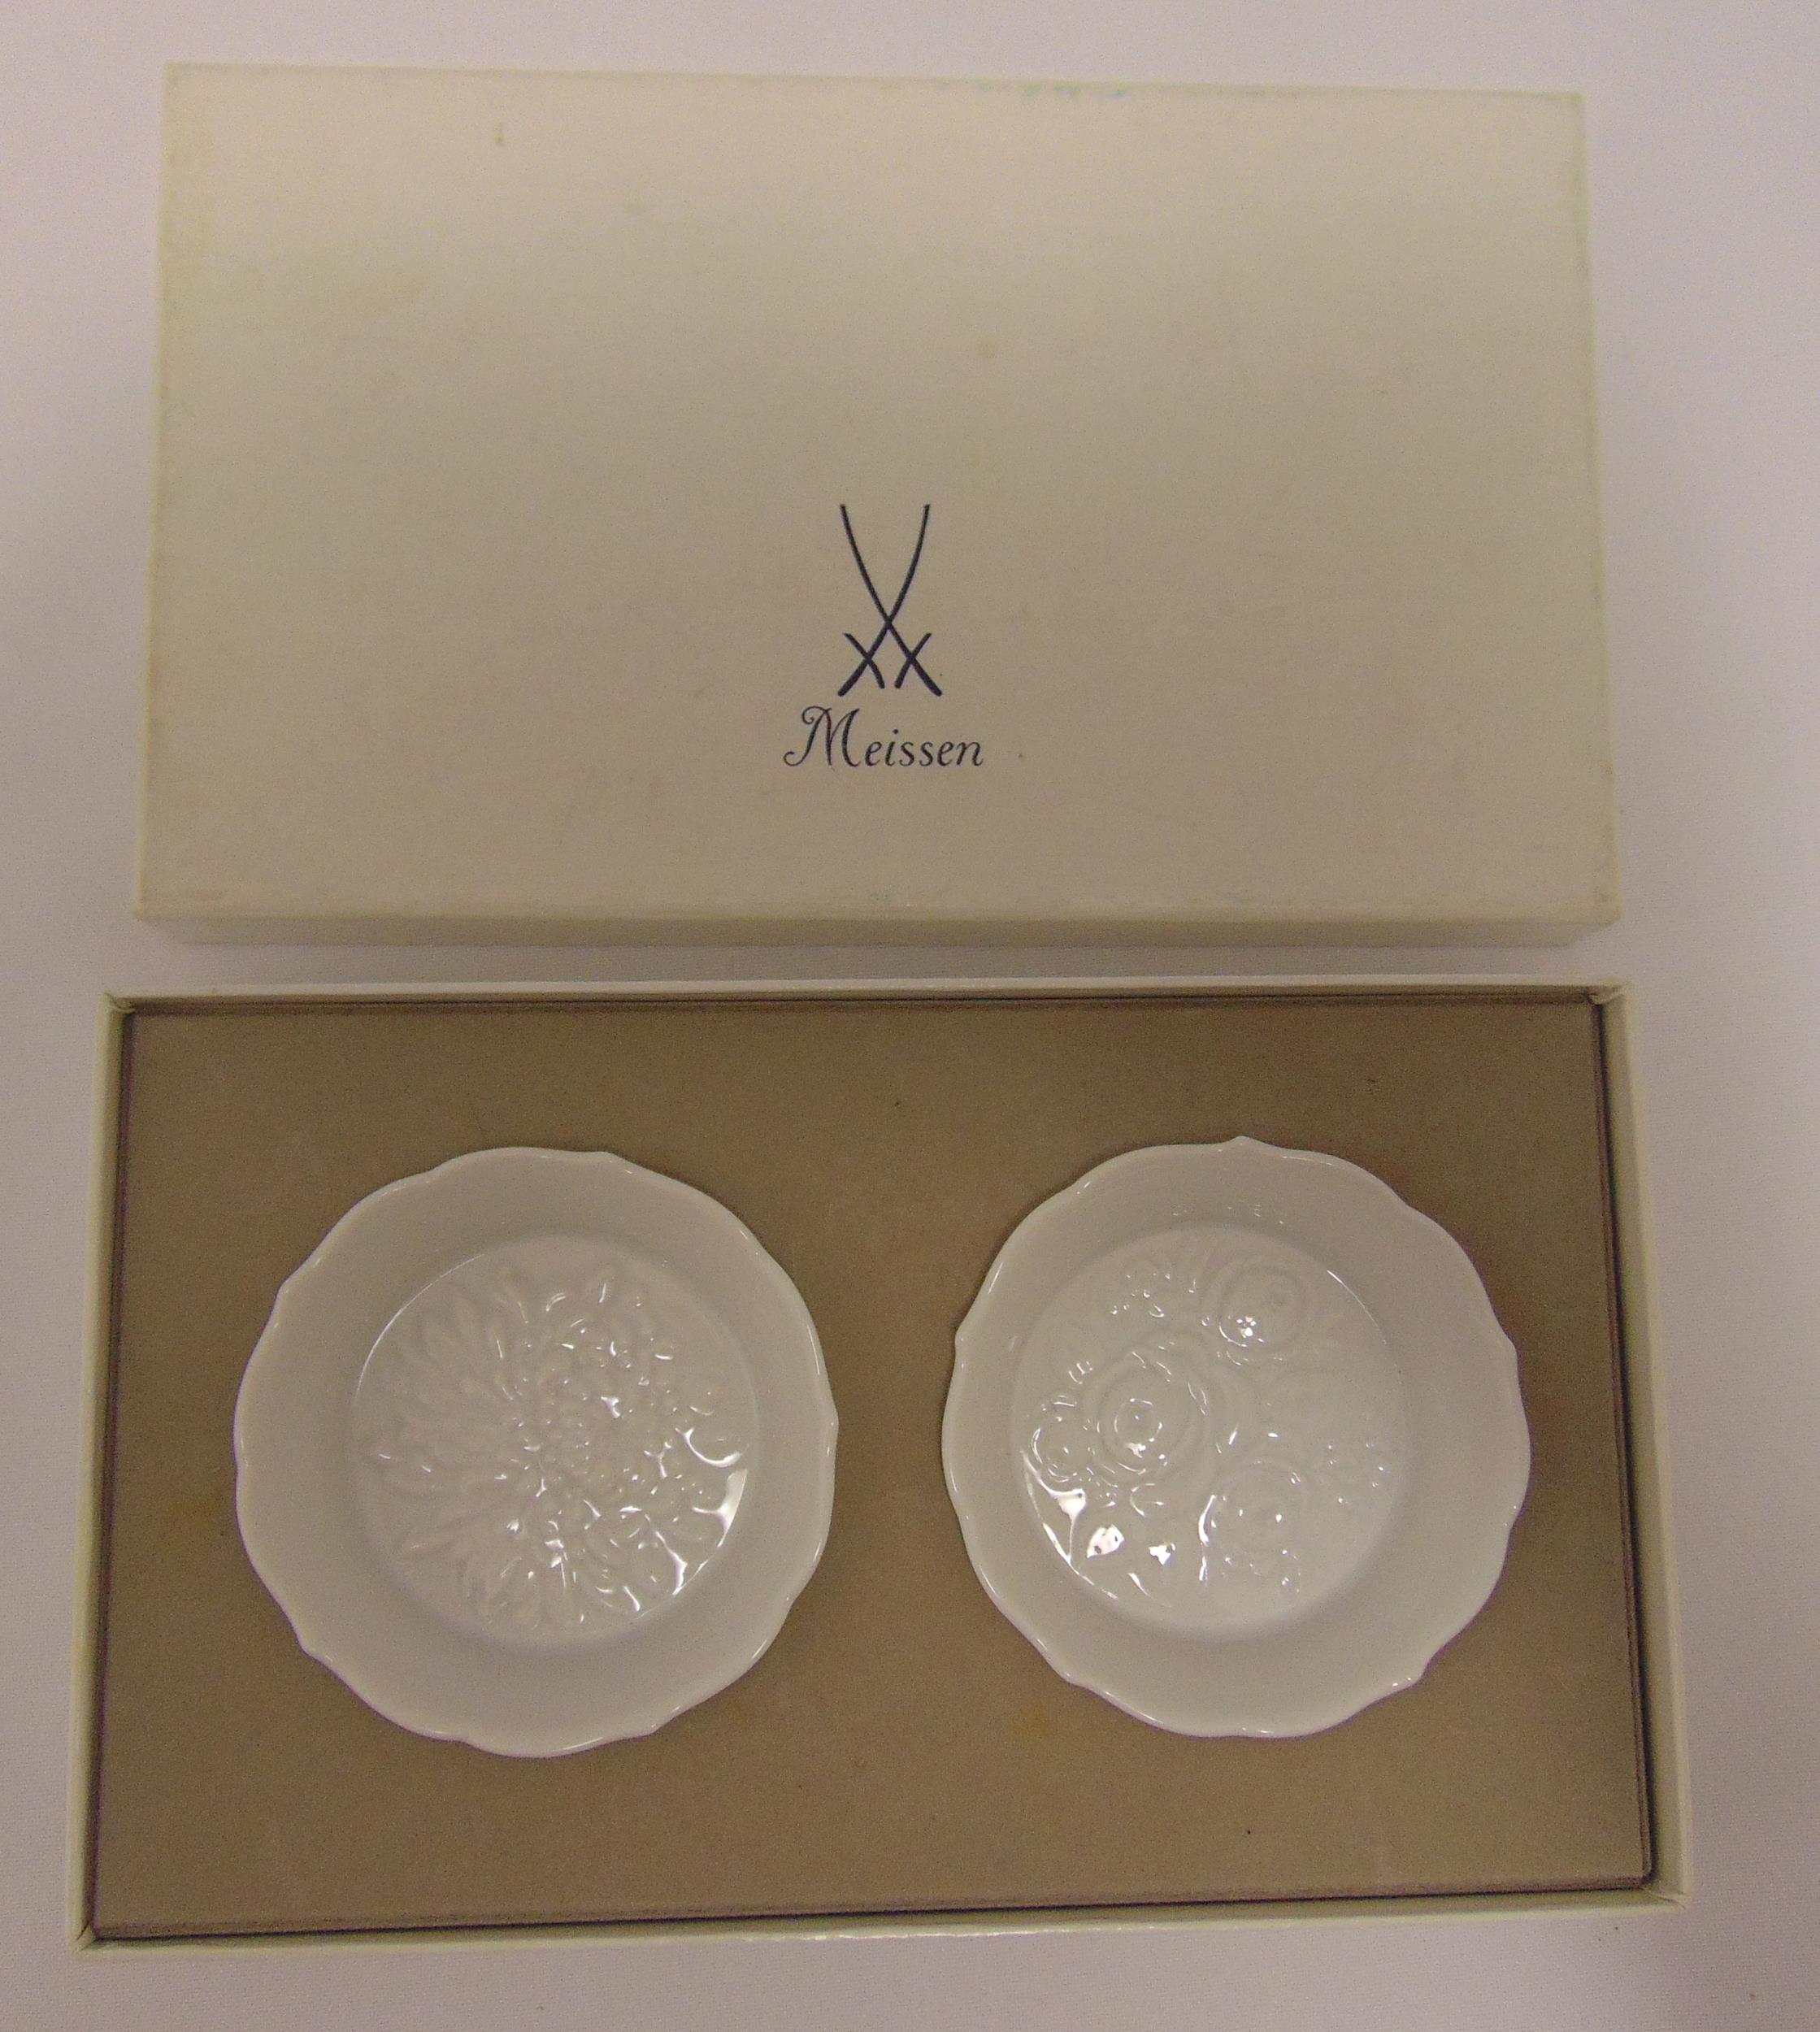 A pair of Meissen bonbon dishes in original packaging with COA, 8cm (d)